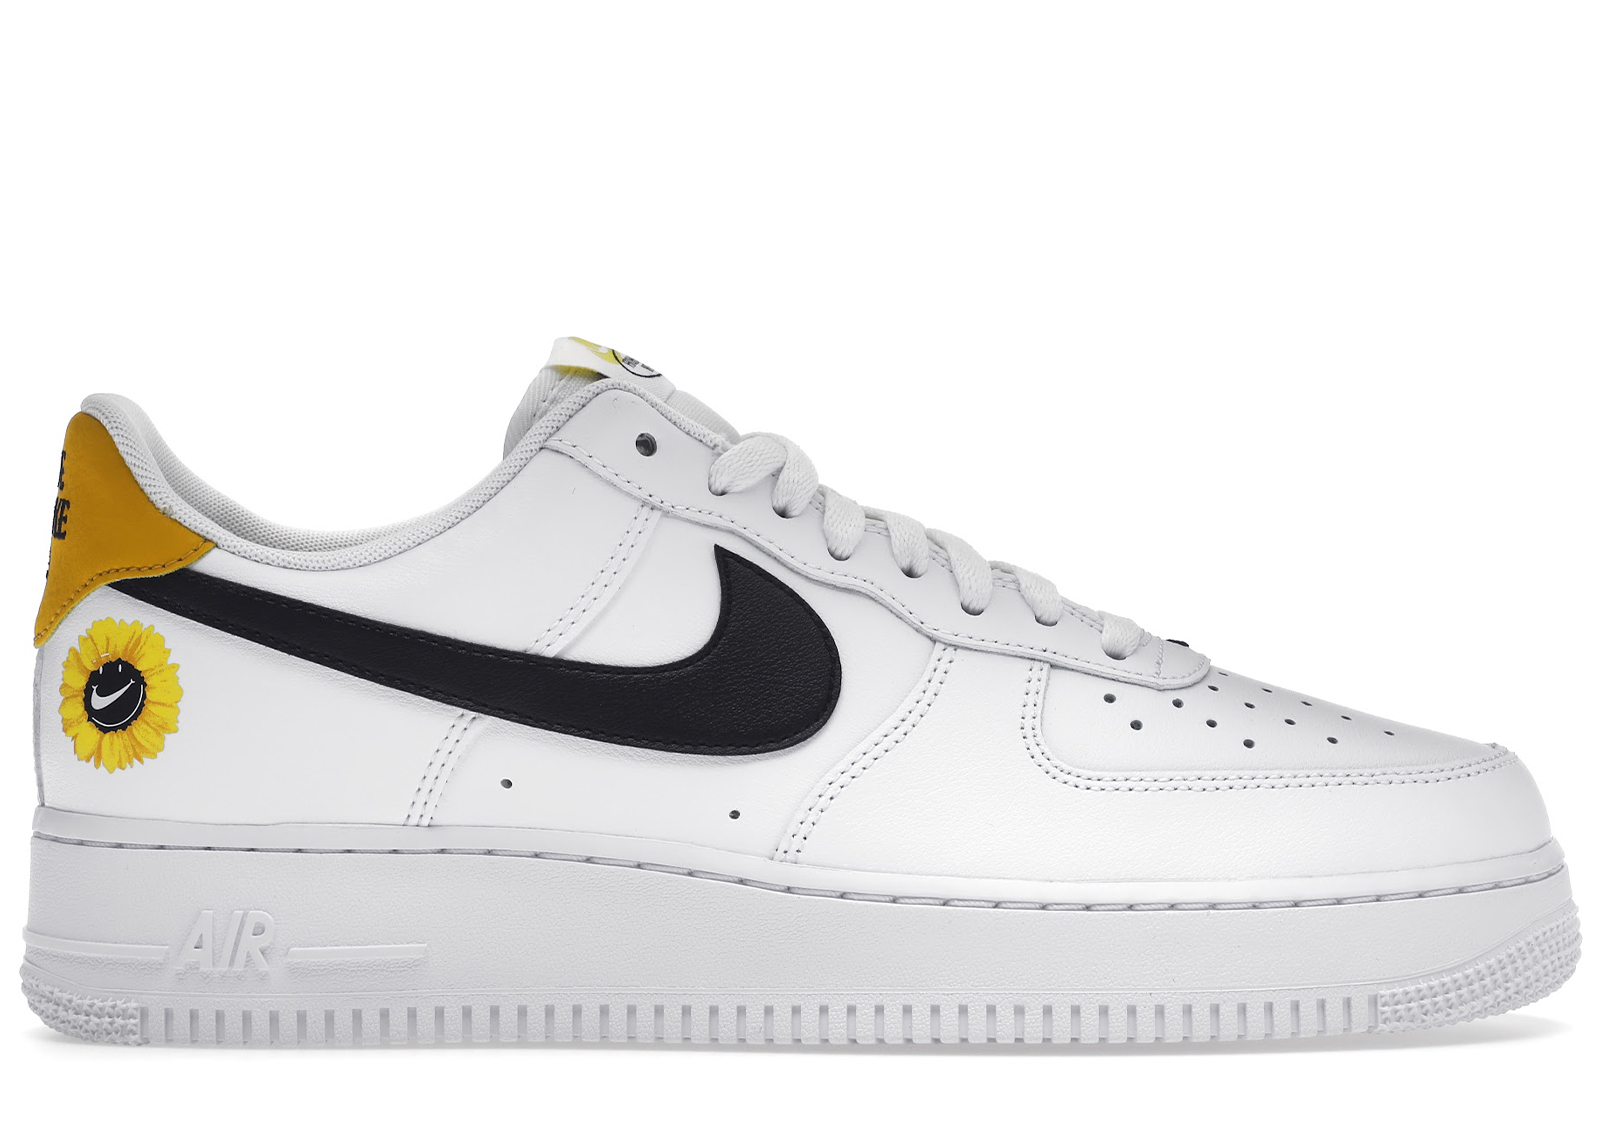 Nike Air Force 1 Low Have a Nike Day White Gold Men's - DM0118-100